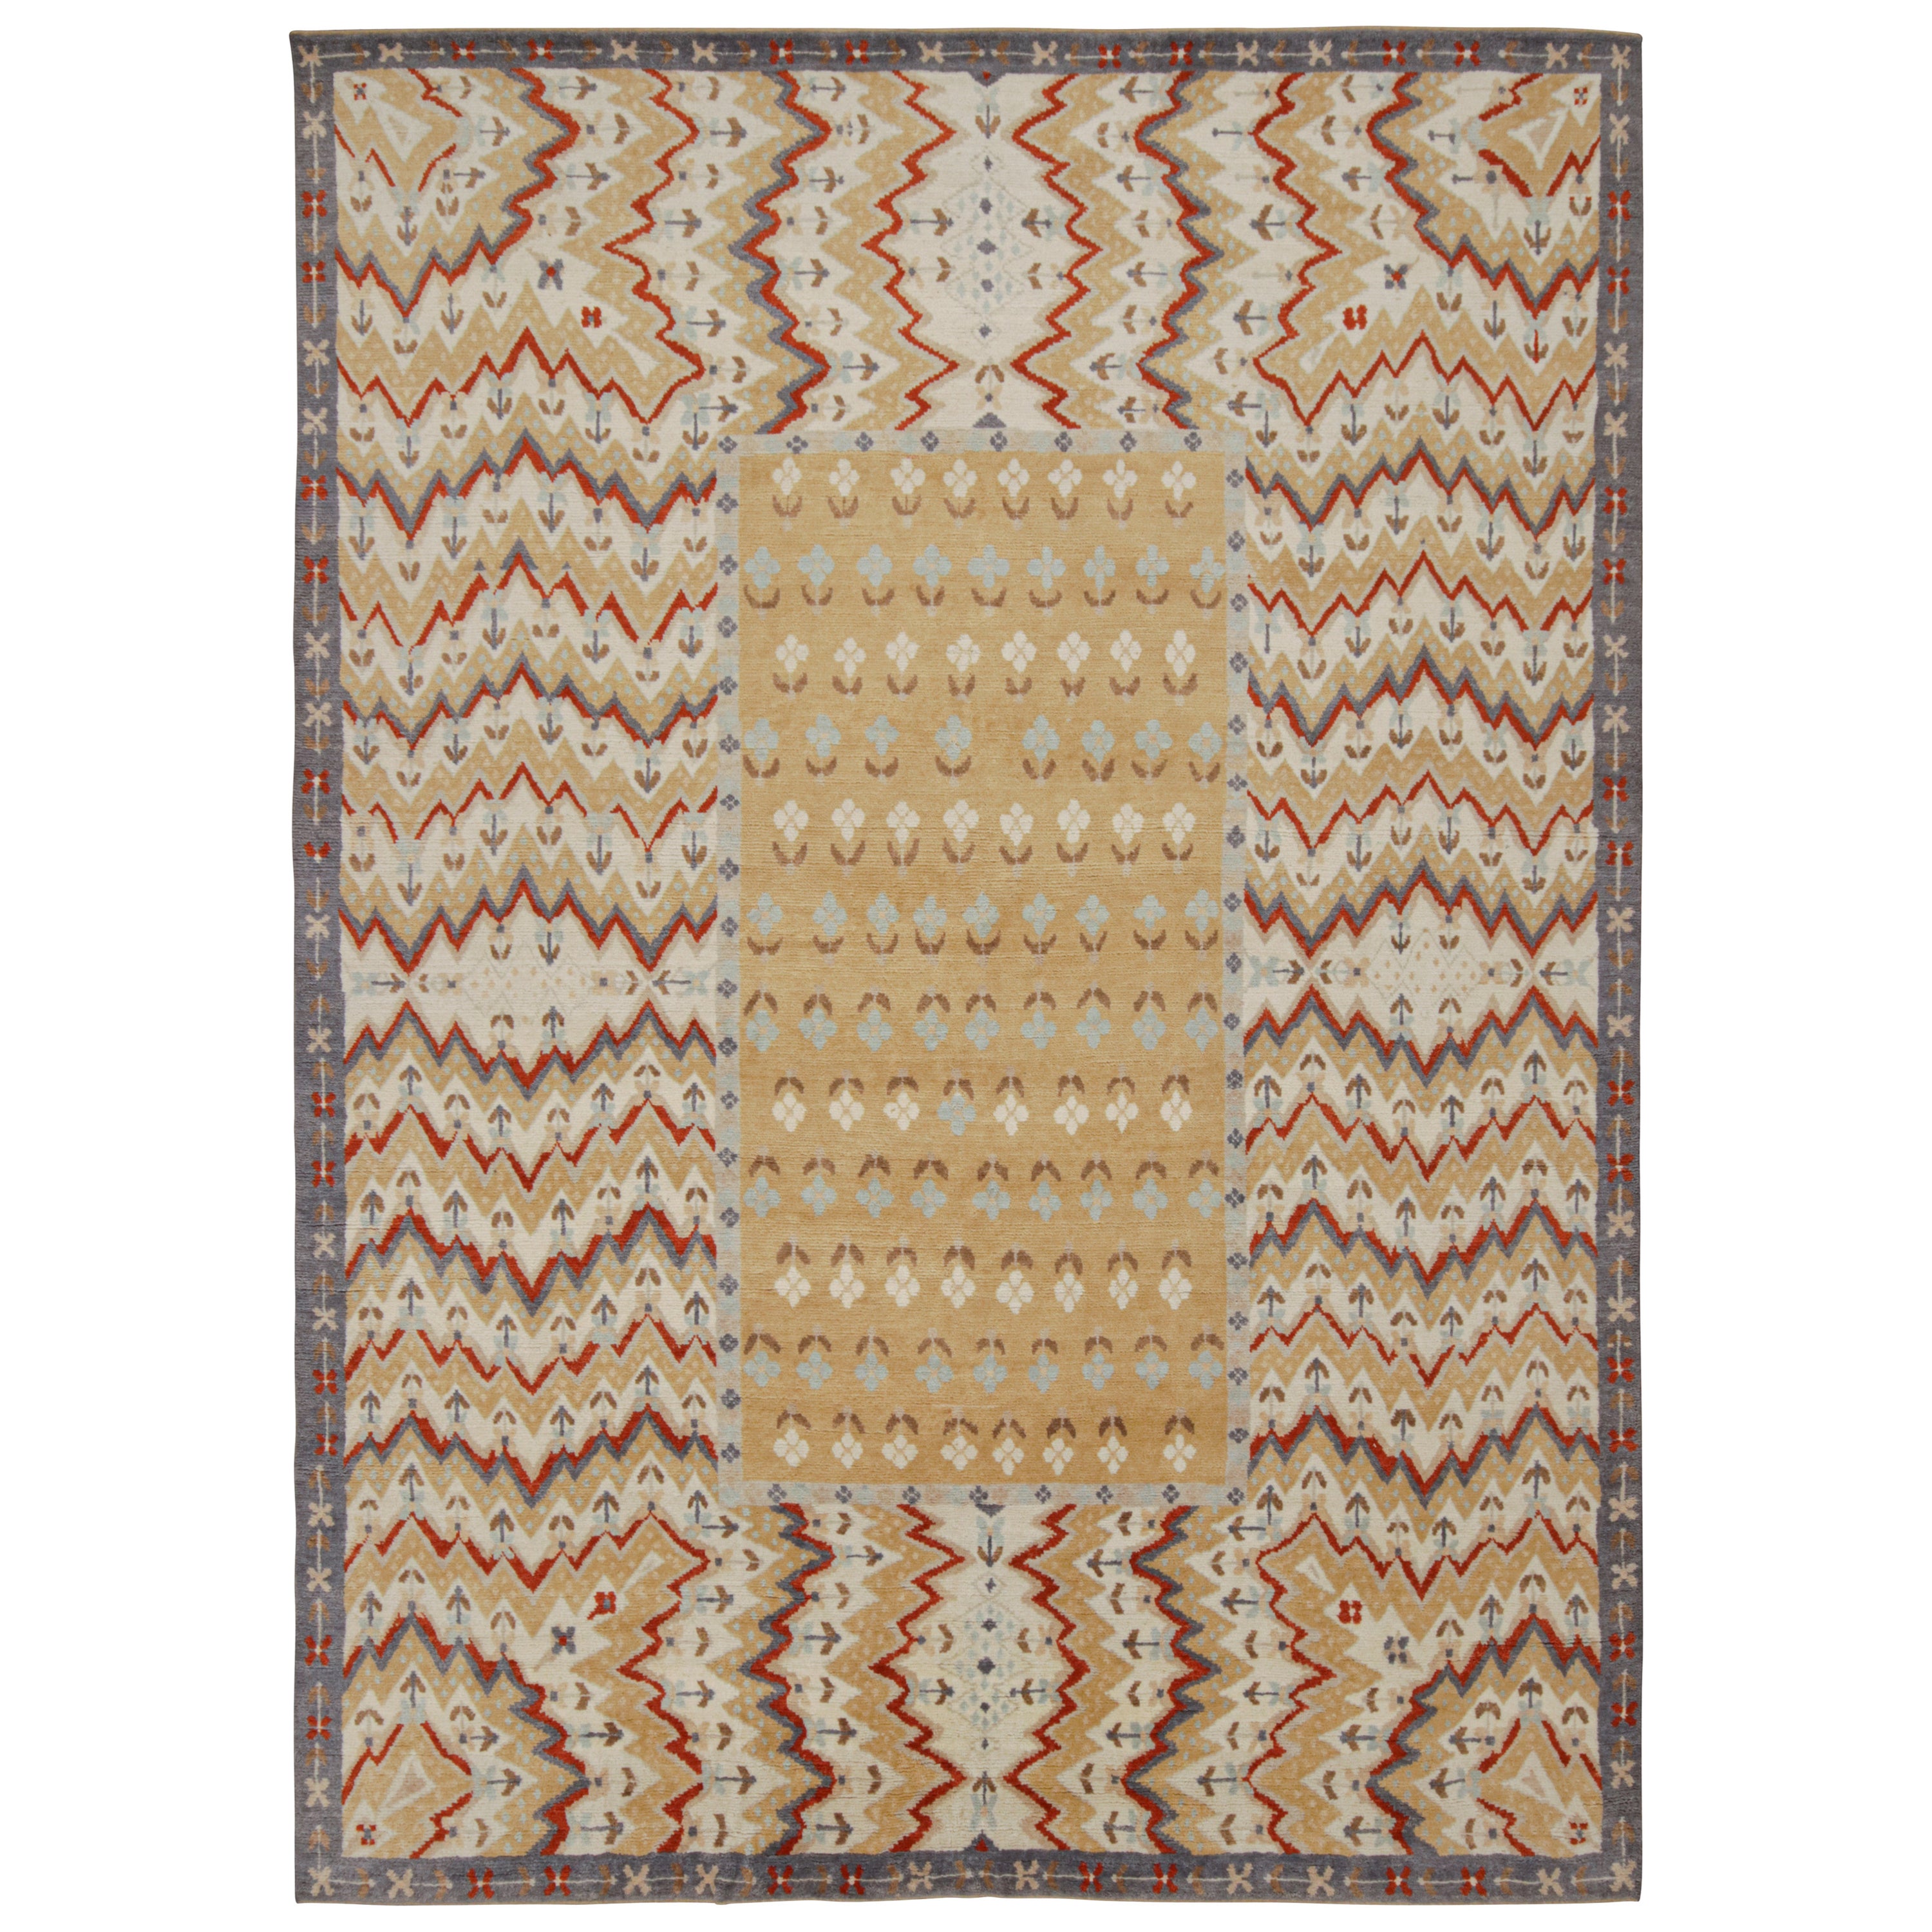 Rug & Kilim’s Tribal Style rug in Gold, Gray & Red Patterns